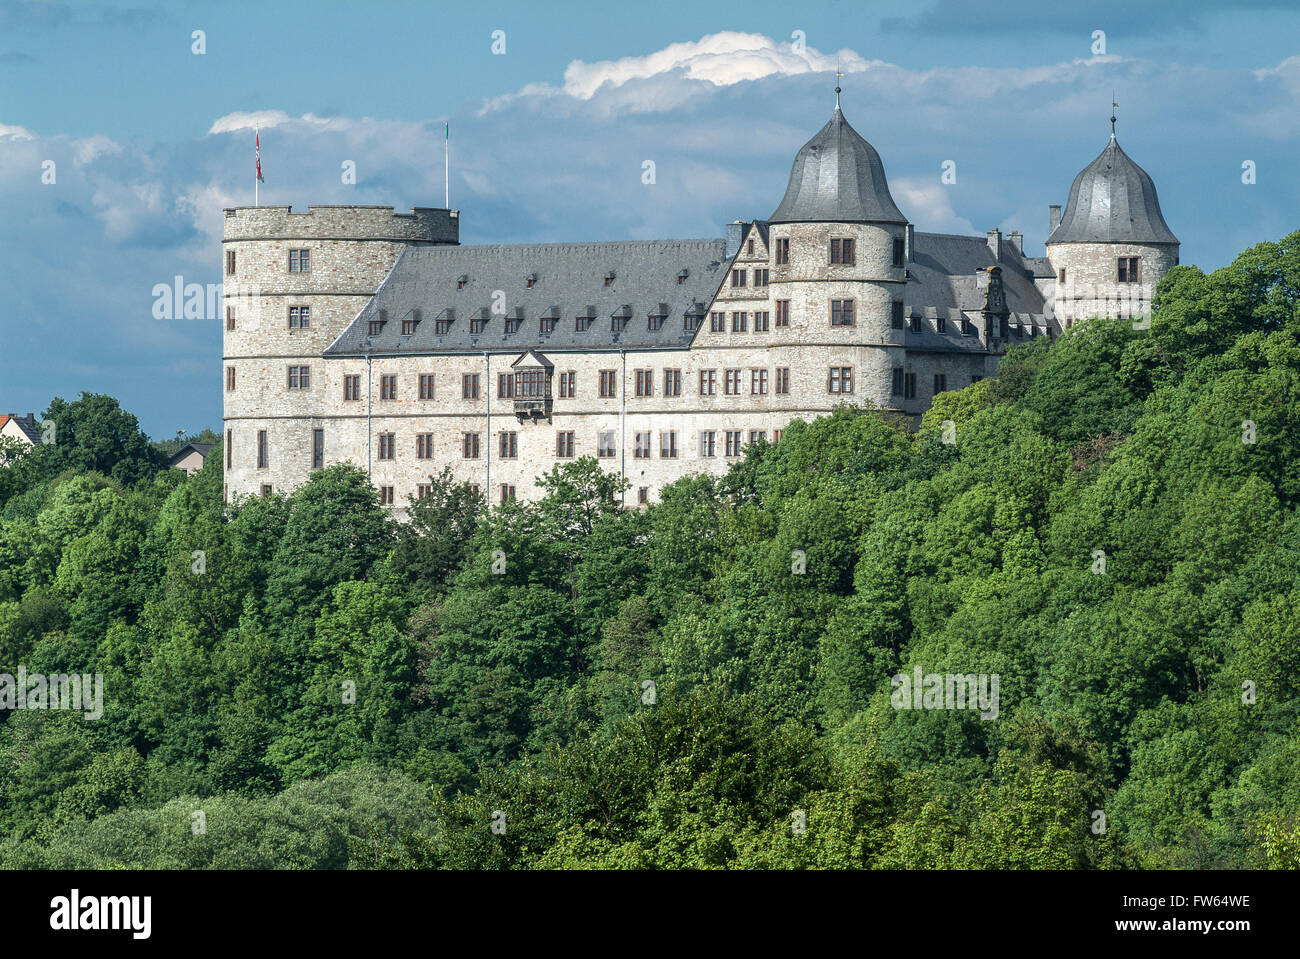 The Wewelsburg, triangular castle, 17th century, 1934-45 cult-site of the SS under Himmler, now Historical Museum Stock Photo